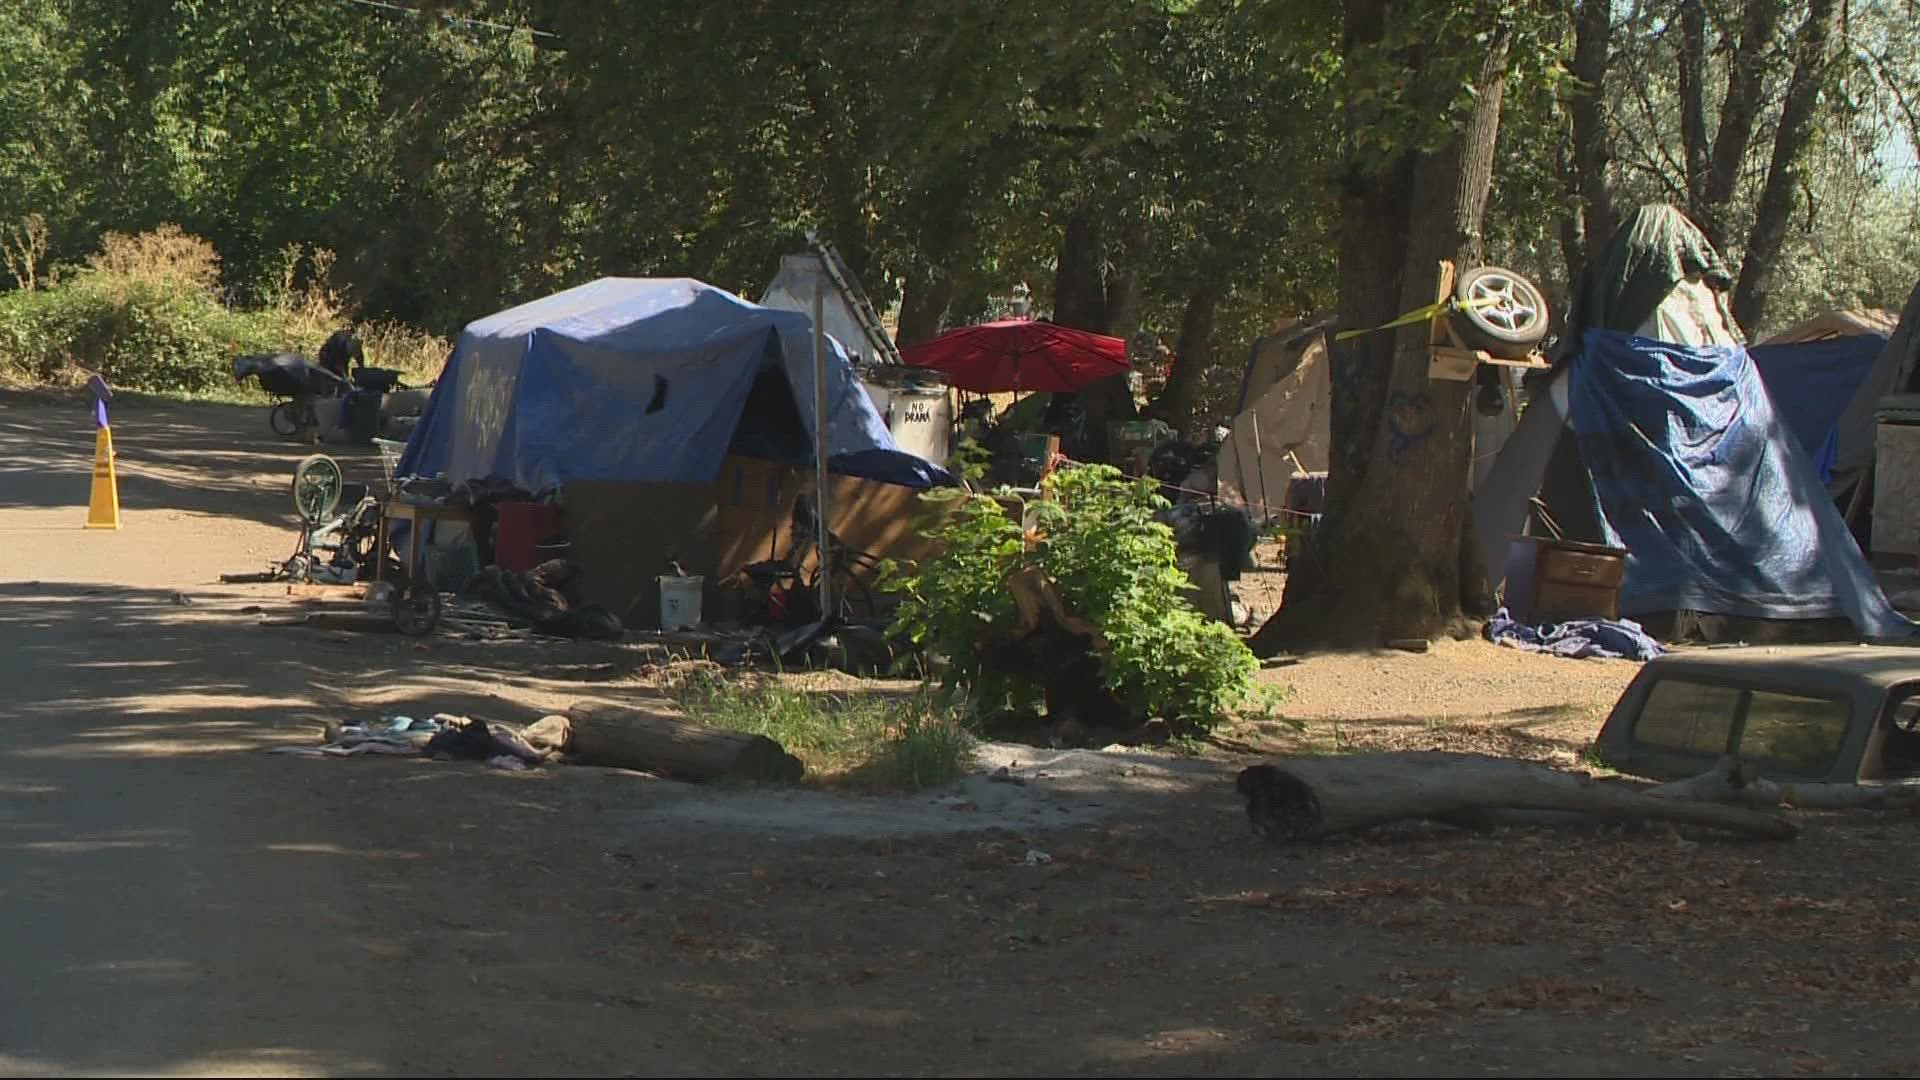 About 50 people live in a homeless encampment along the Peninsula Crossing Trail in North Portland.